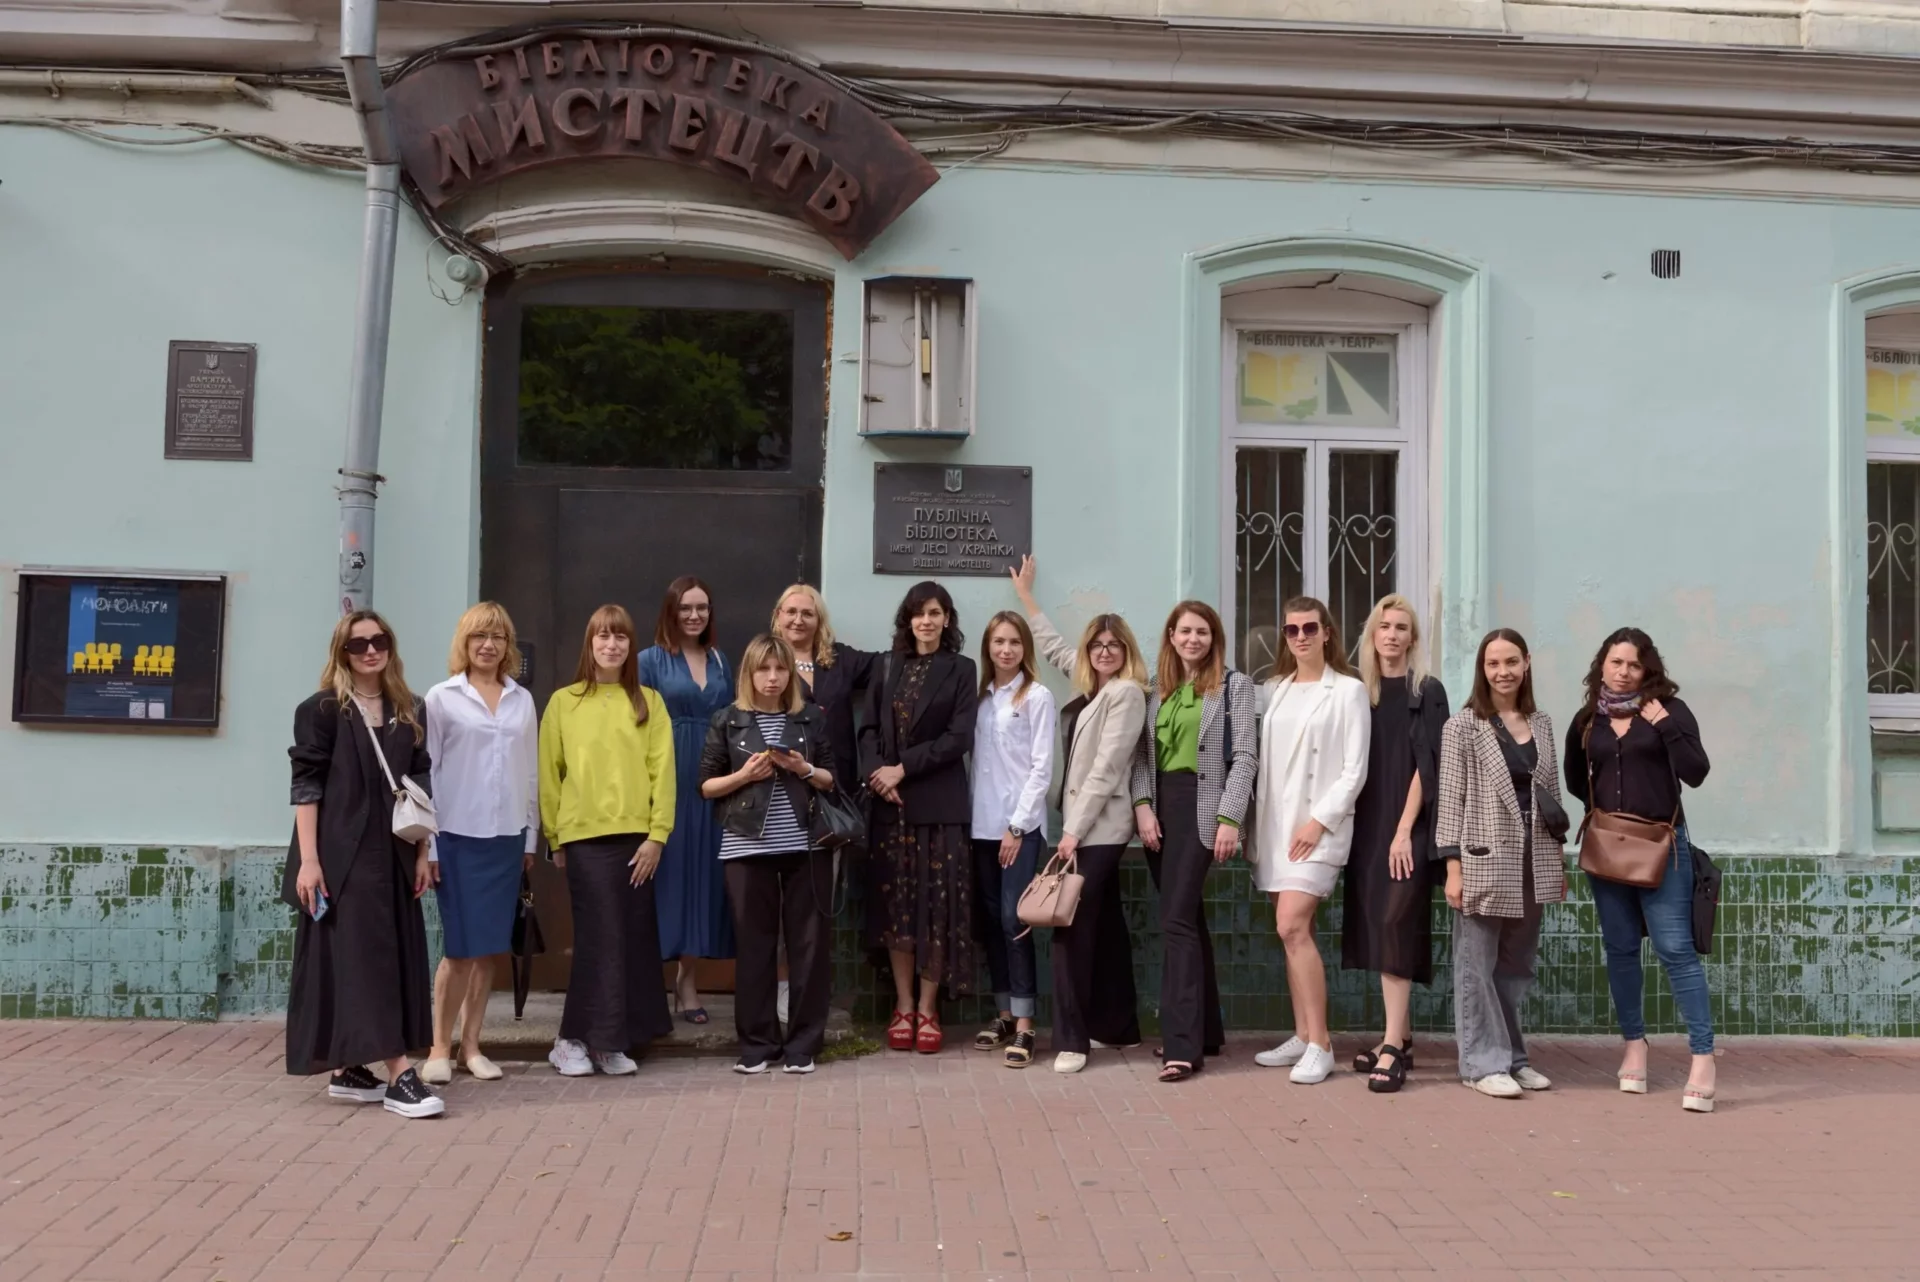 Art that instills leadership skills: the team of New Products Group attended a performance dedicated to Olena Teliha